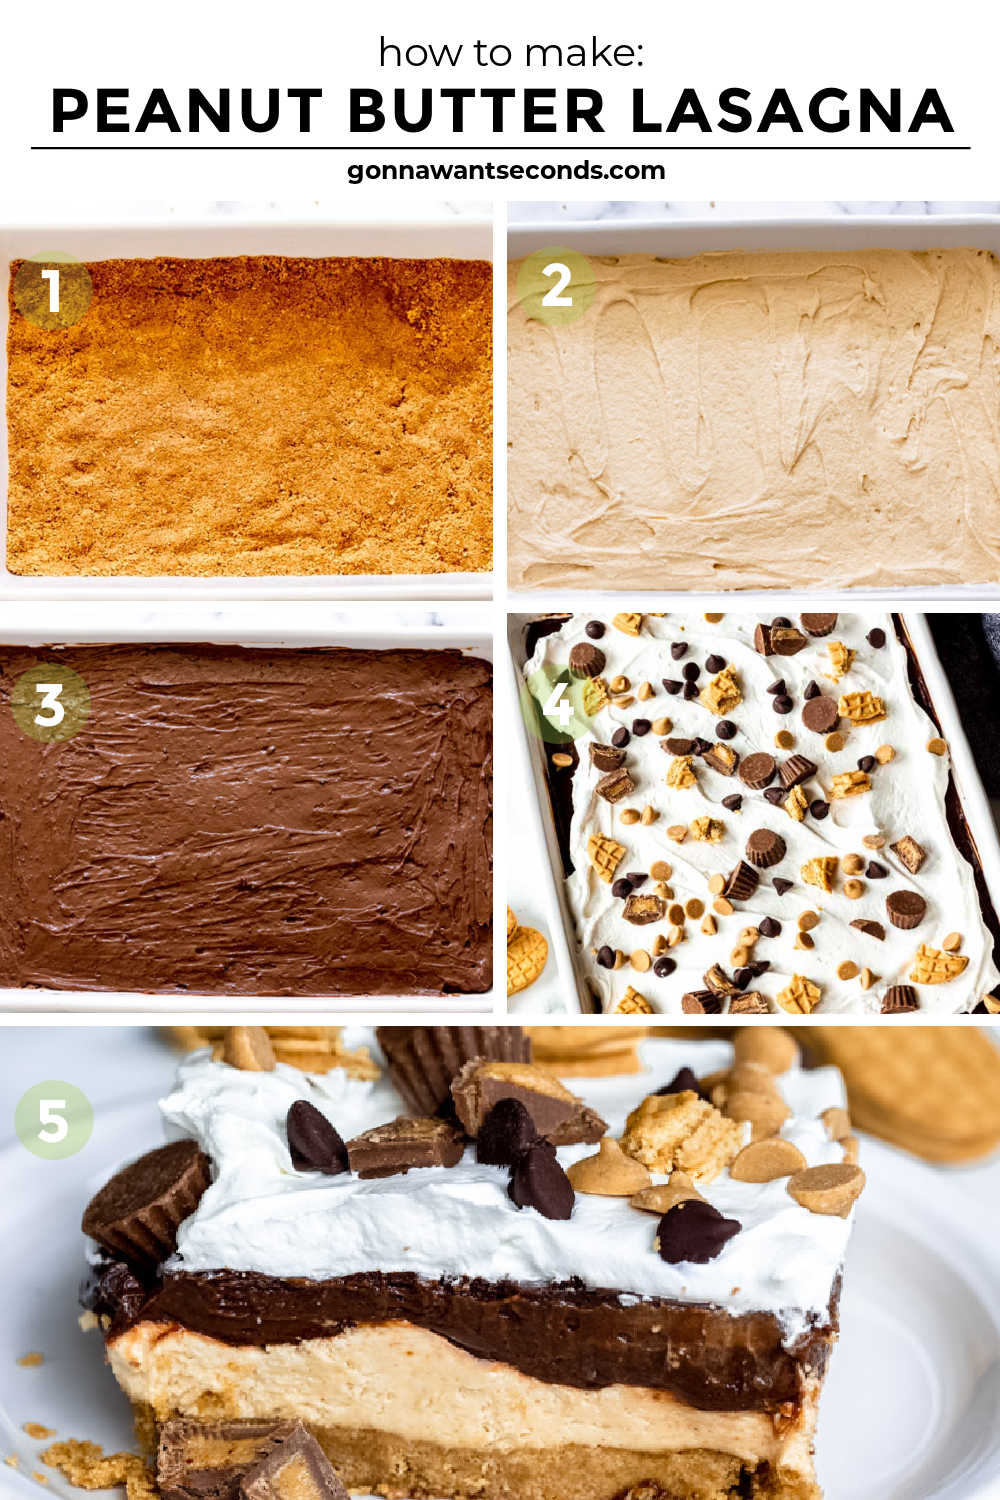 Step by step how to make peanut butter lasagna